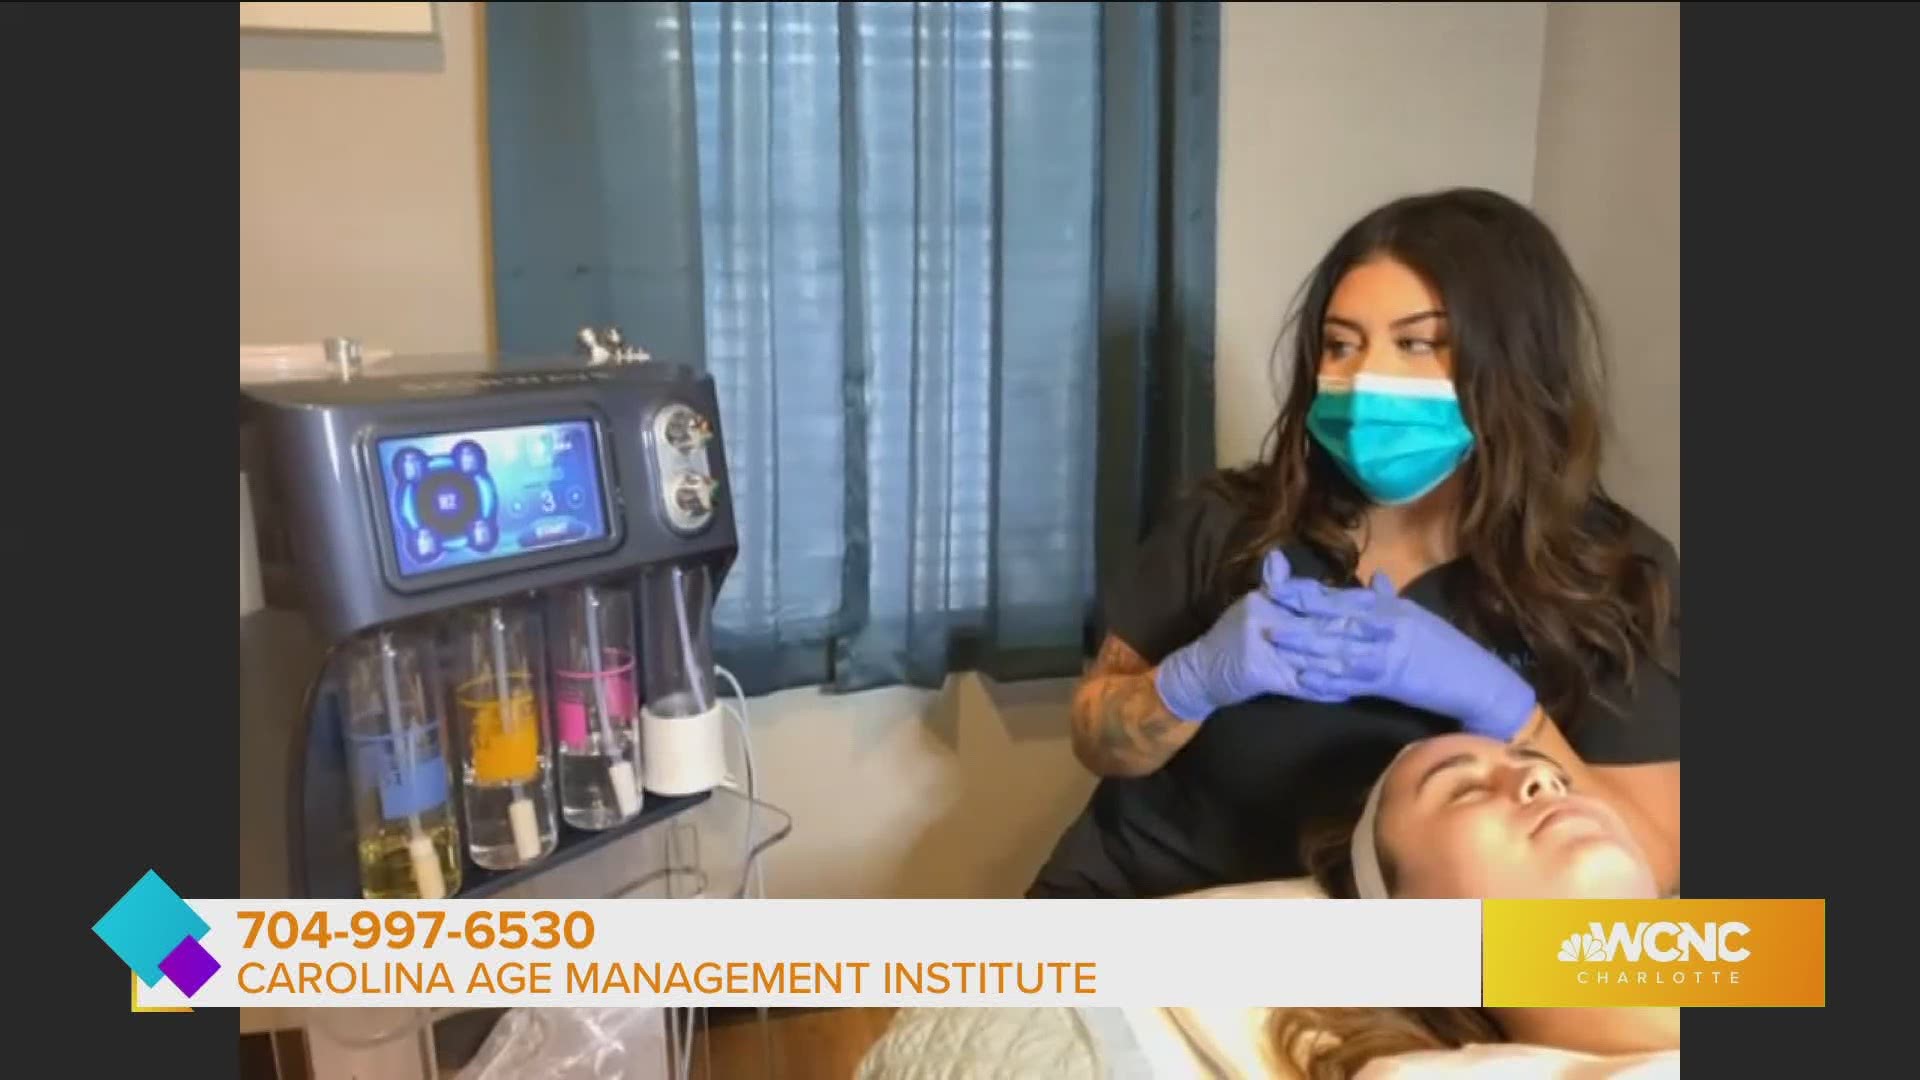 Carolina Age Management Institute explains how the innovative treatment can help with outbreaks caused by masks